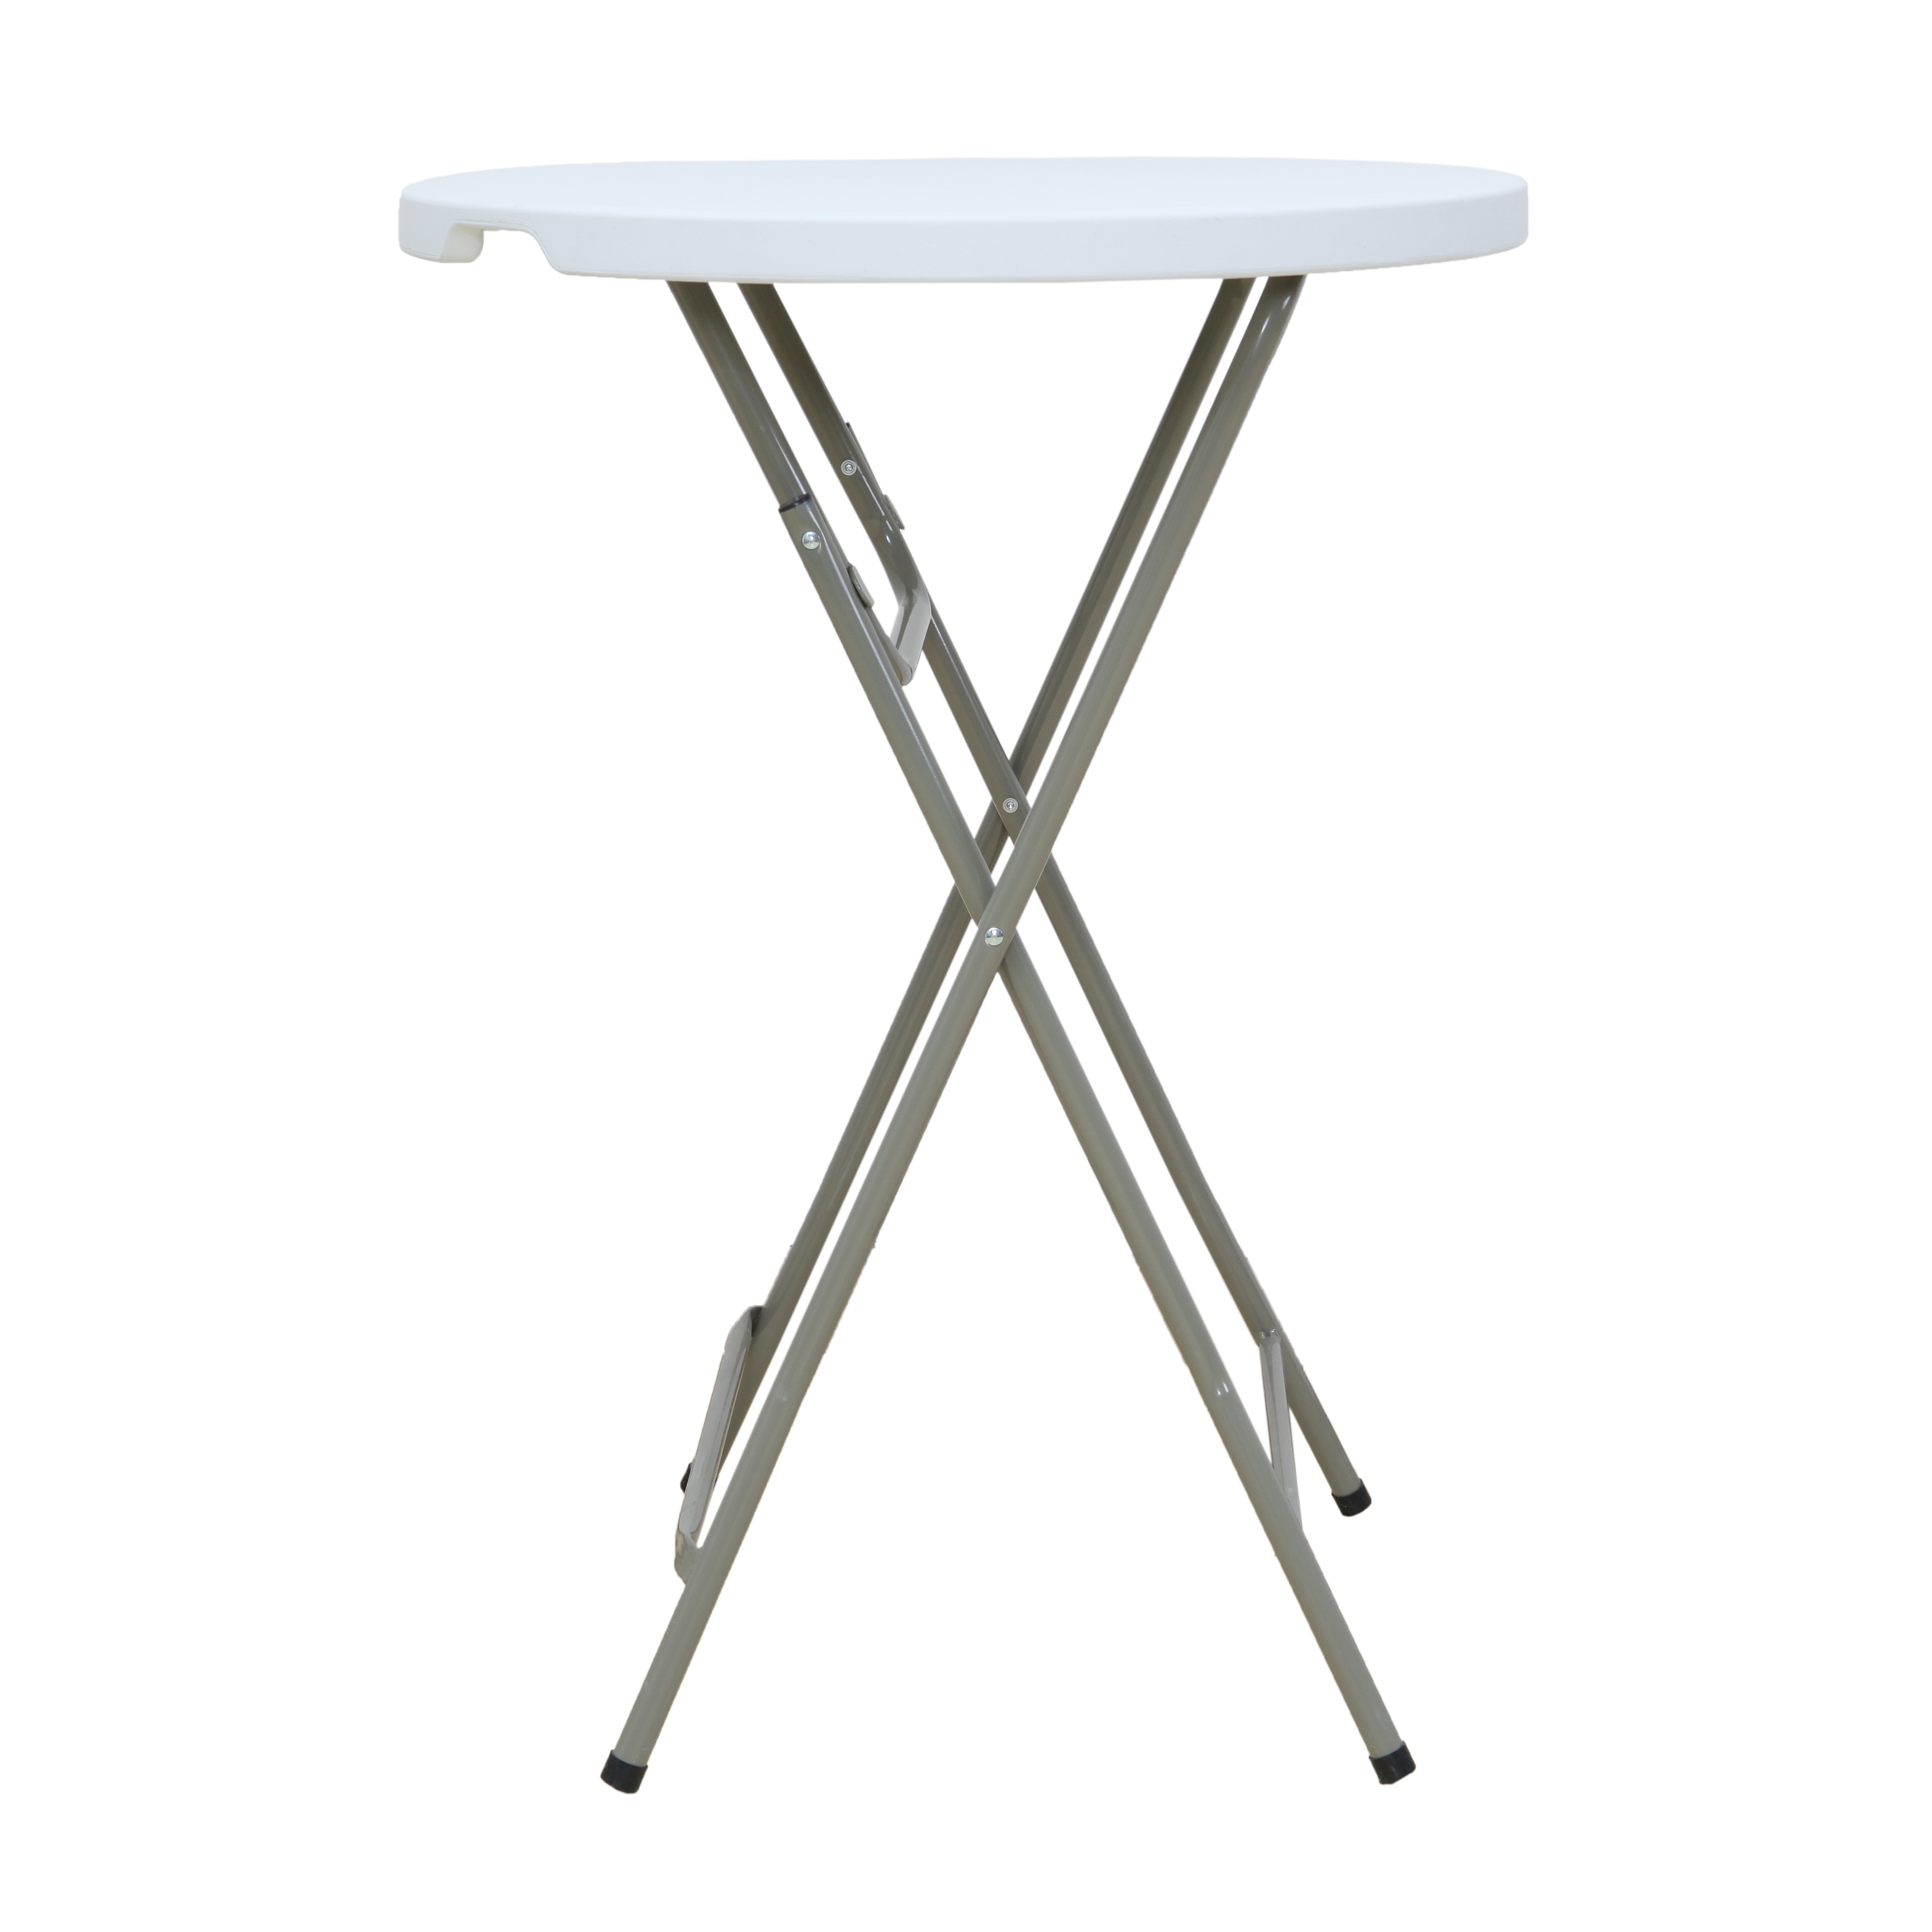  table  ECO 2 MD Quicktent tente pliante  stand  pliable 